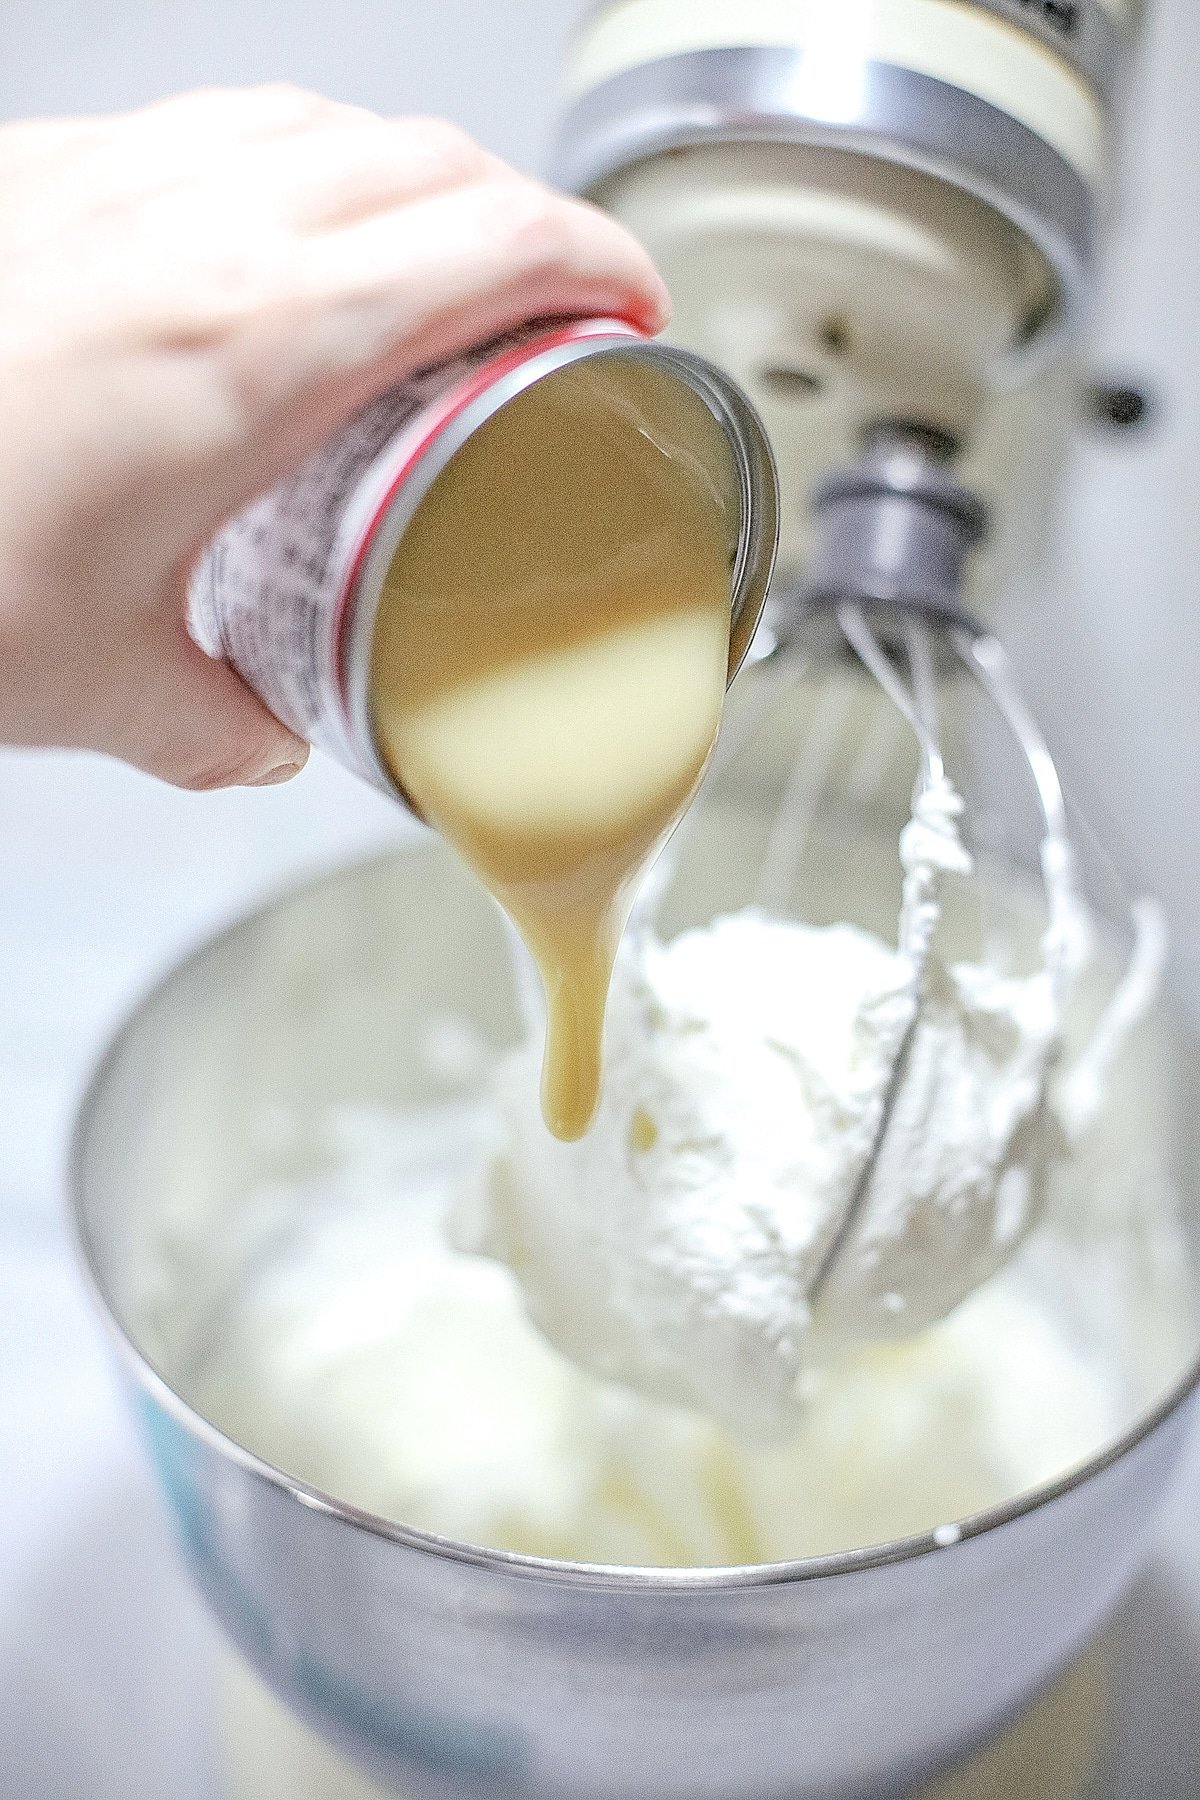 Add condensed milk to whipped cream